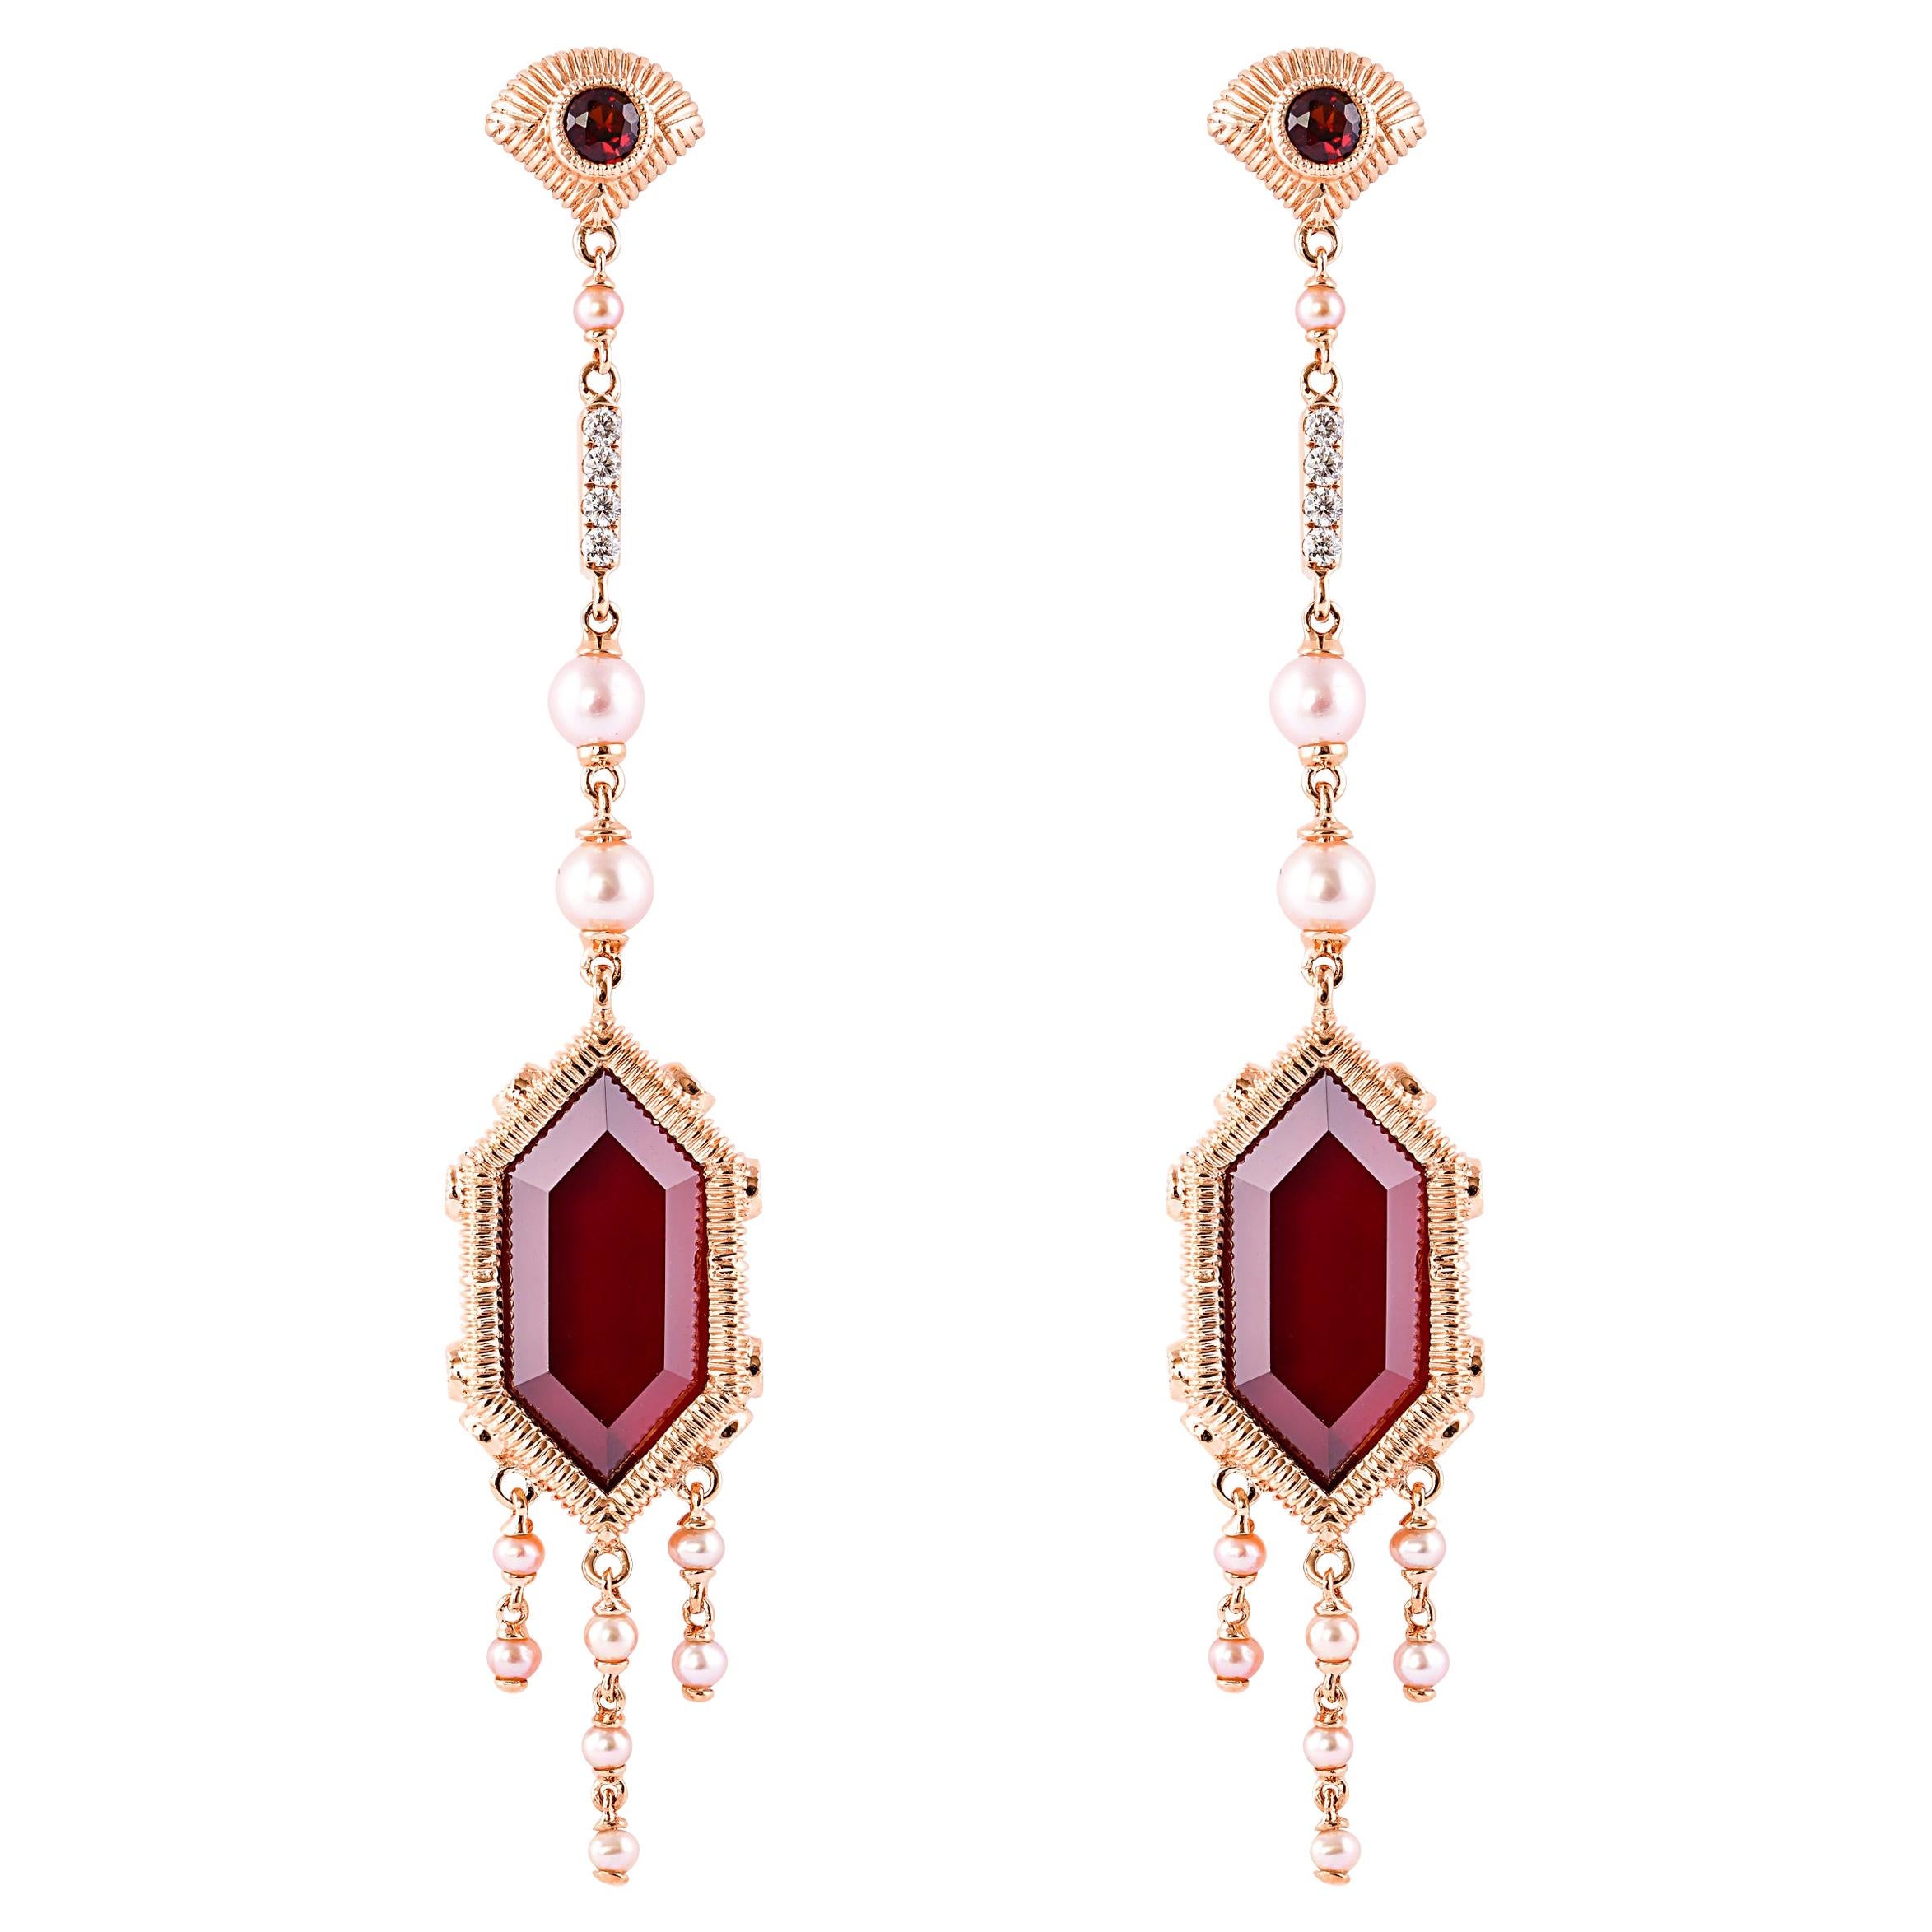 23.42 Carat Red Garnet Earring in 18 Karat Rose Gold with Diamonds and Pearls For Sale